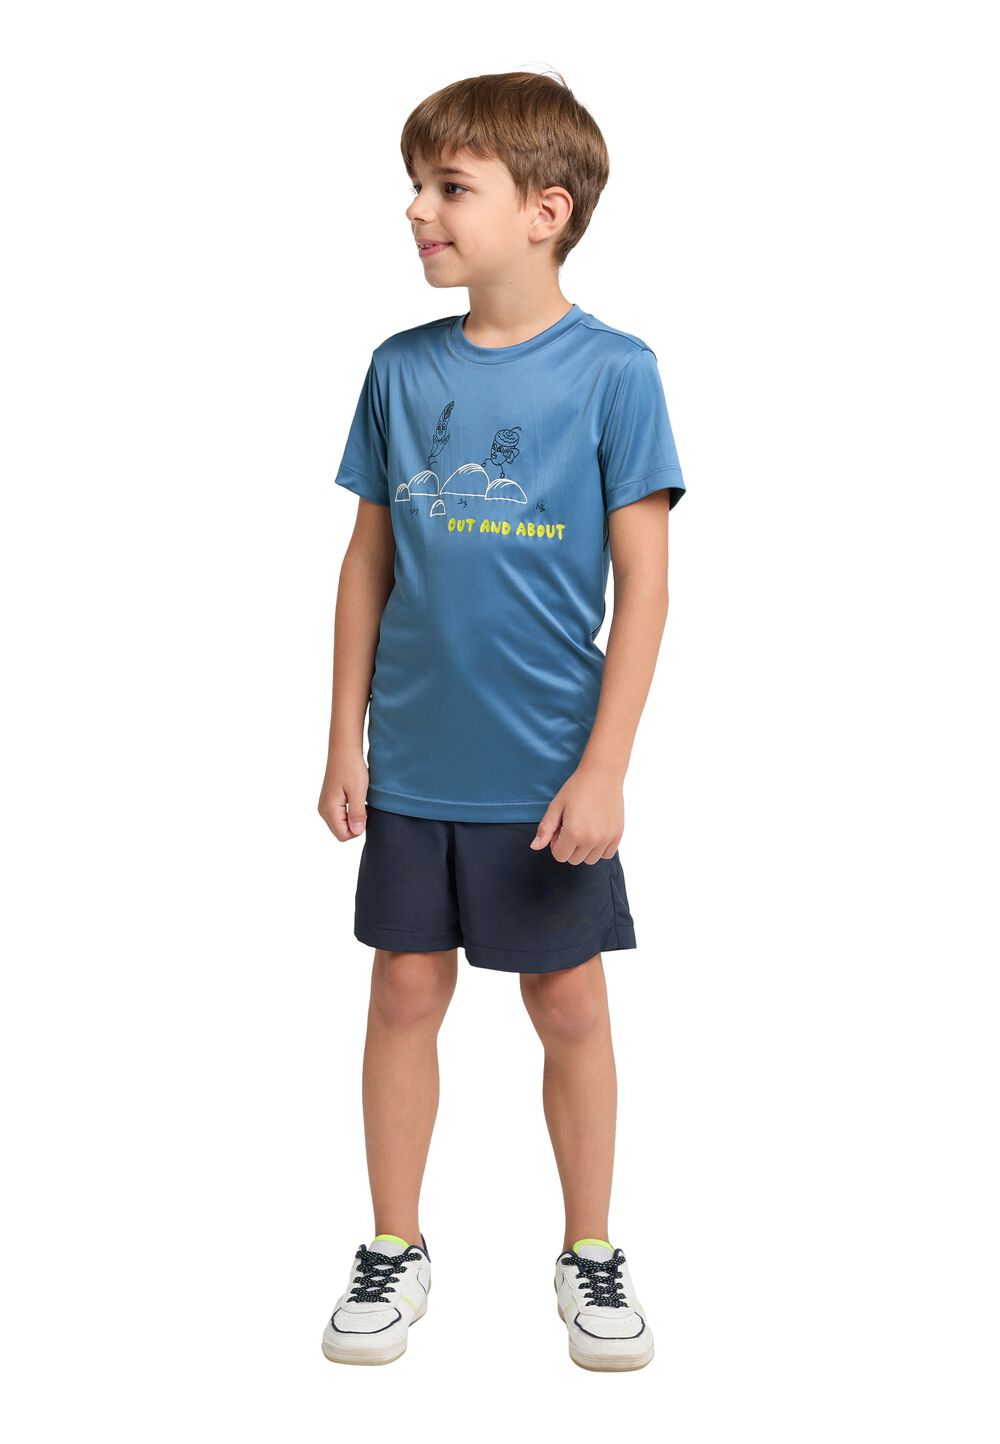 Jack Wolfskin OUT AND About T-Shirt Kids Functioneel shirt Kinderen 128 ele tal blue ele tal blue